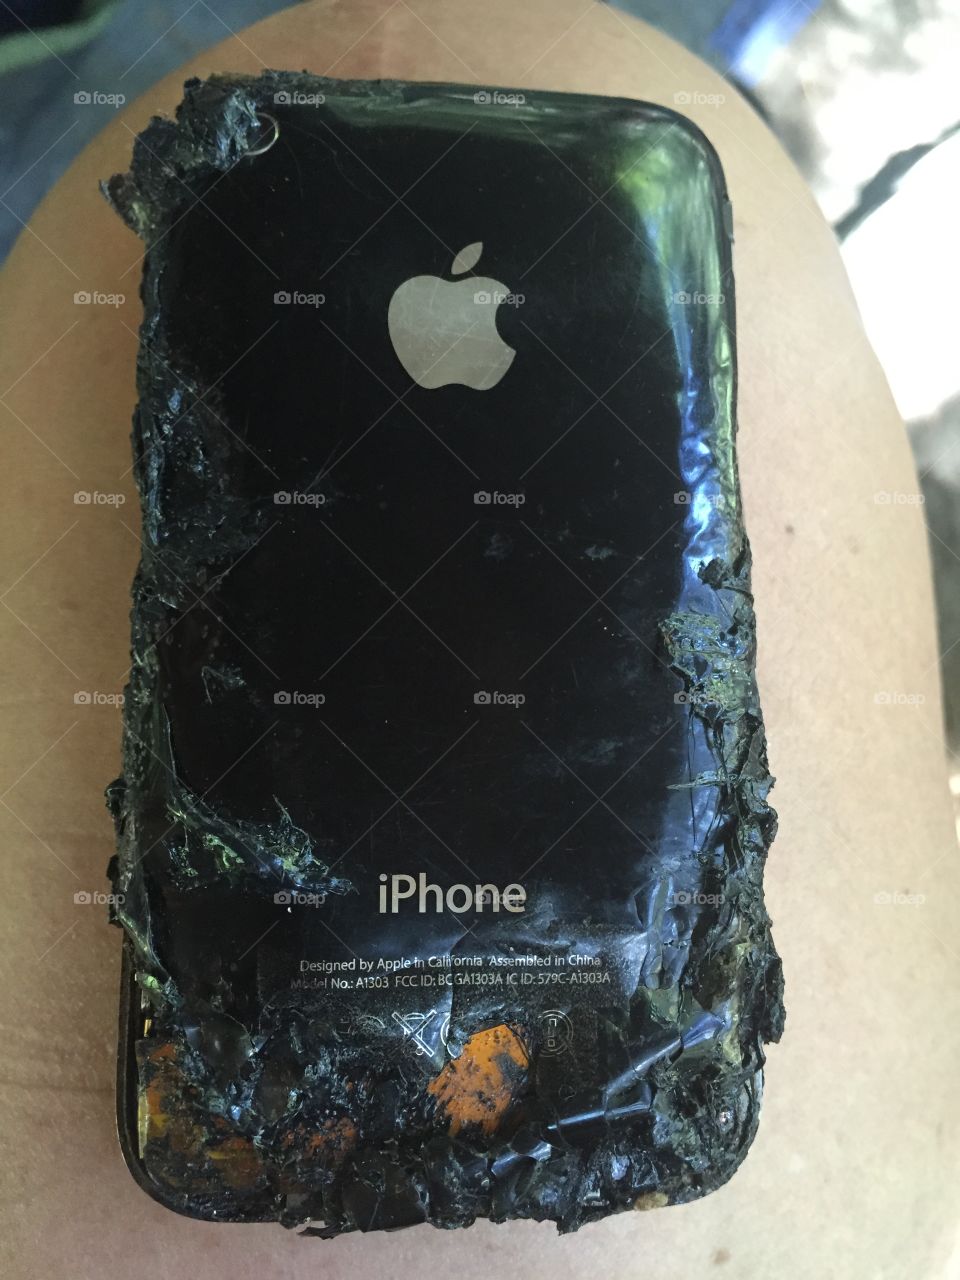 Burnt. iPhone fell into campfire